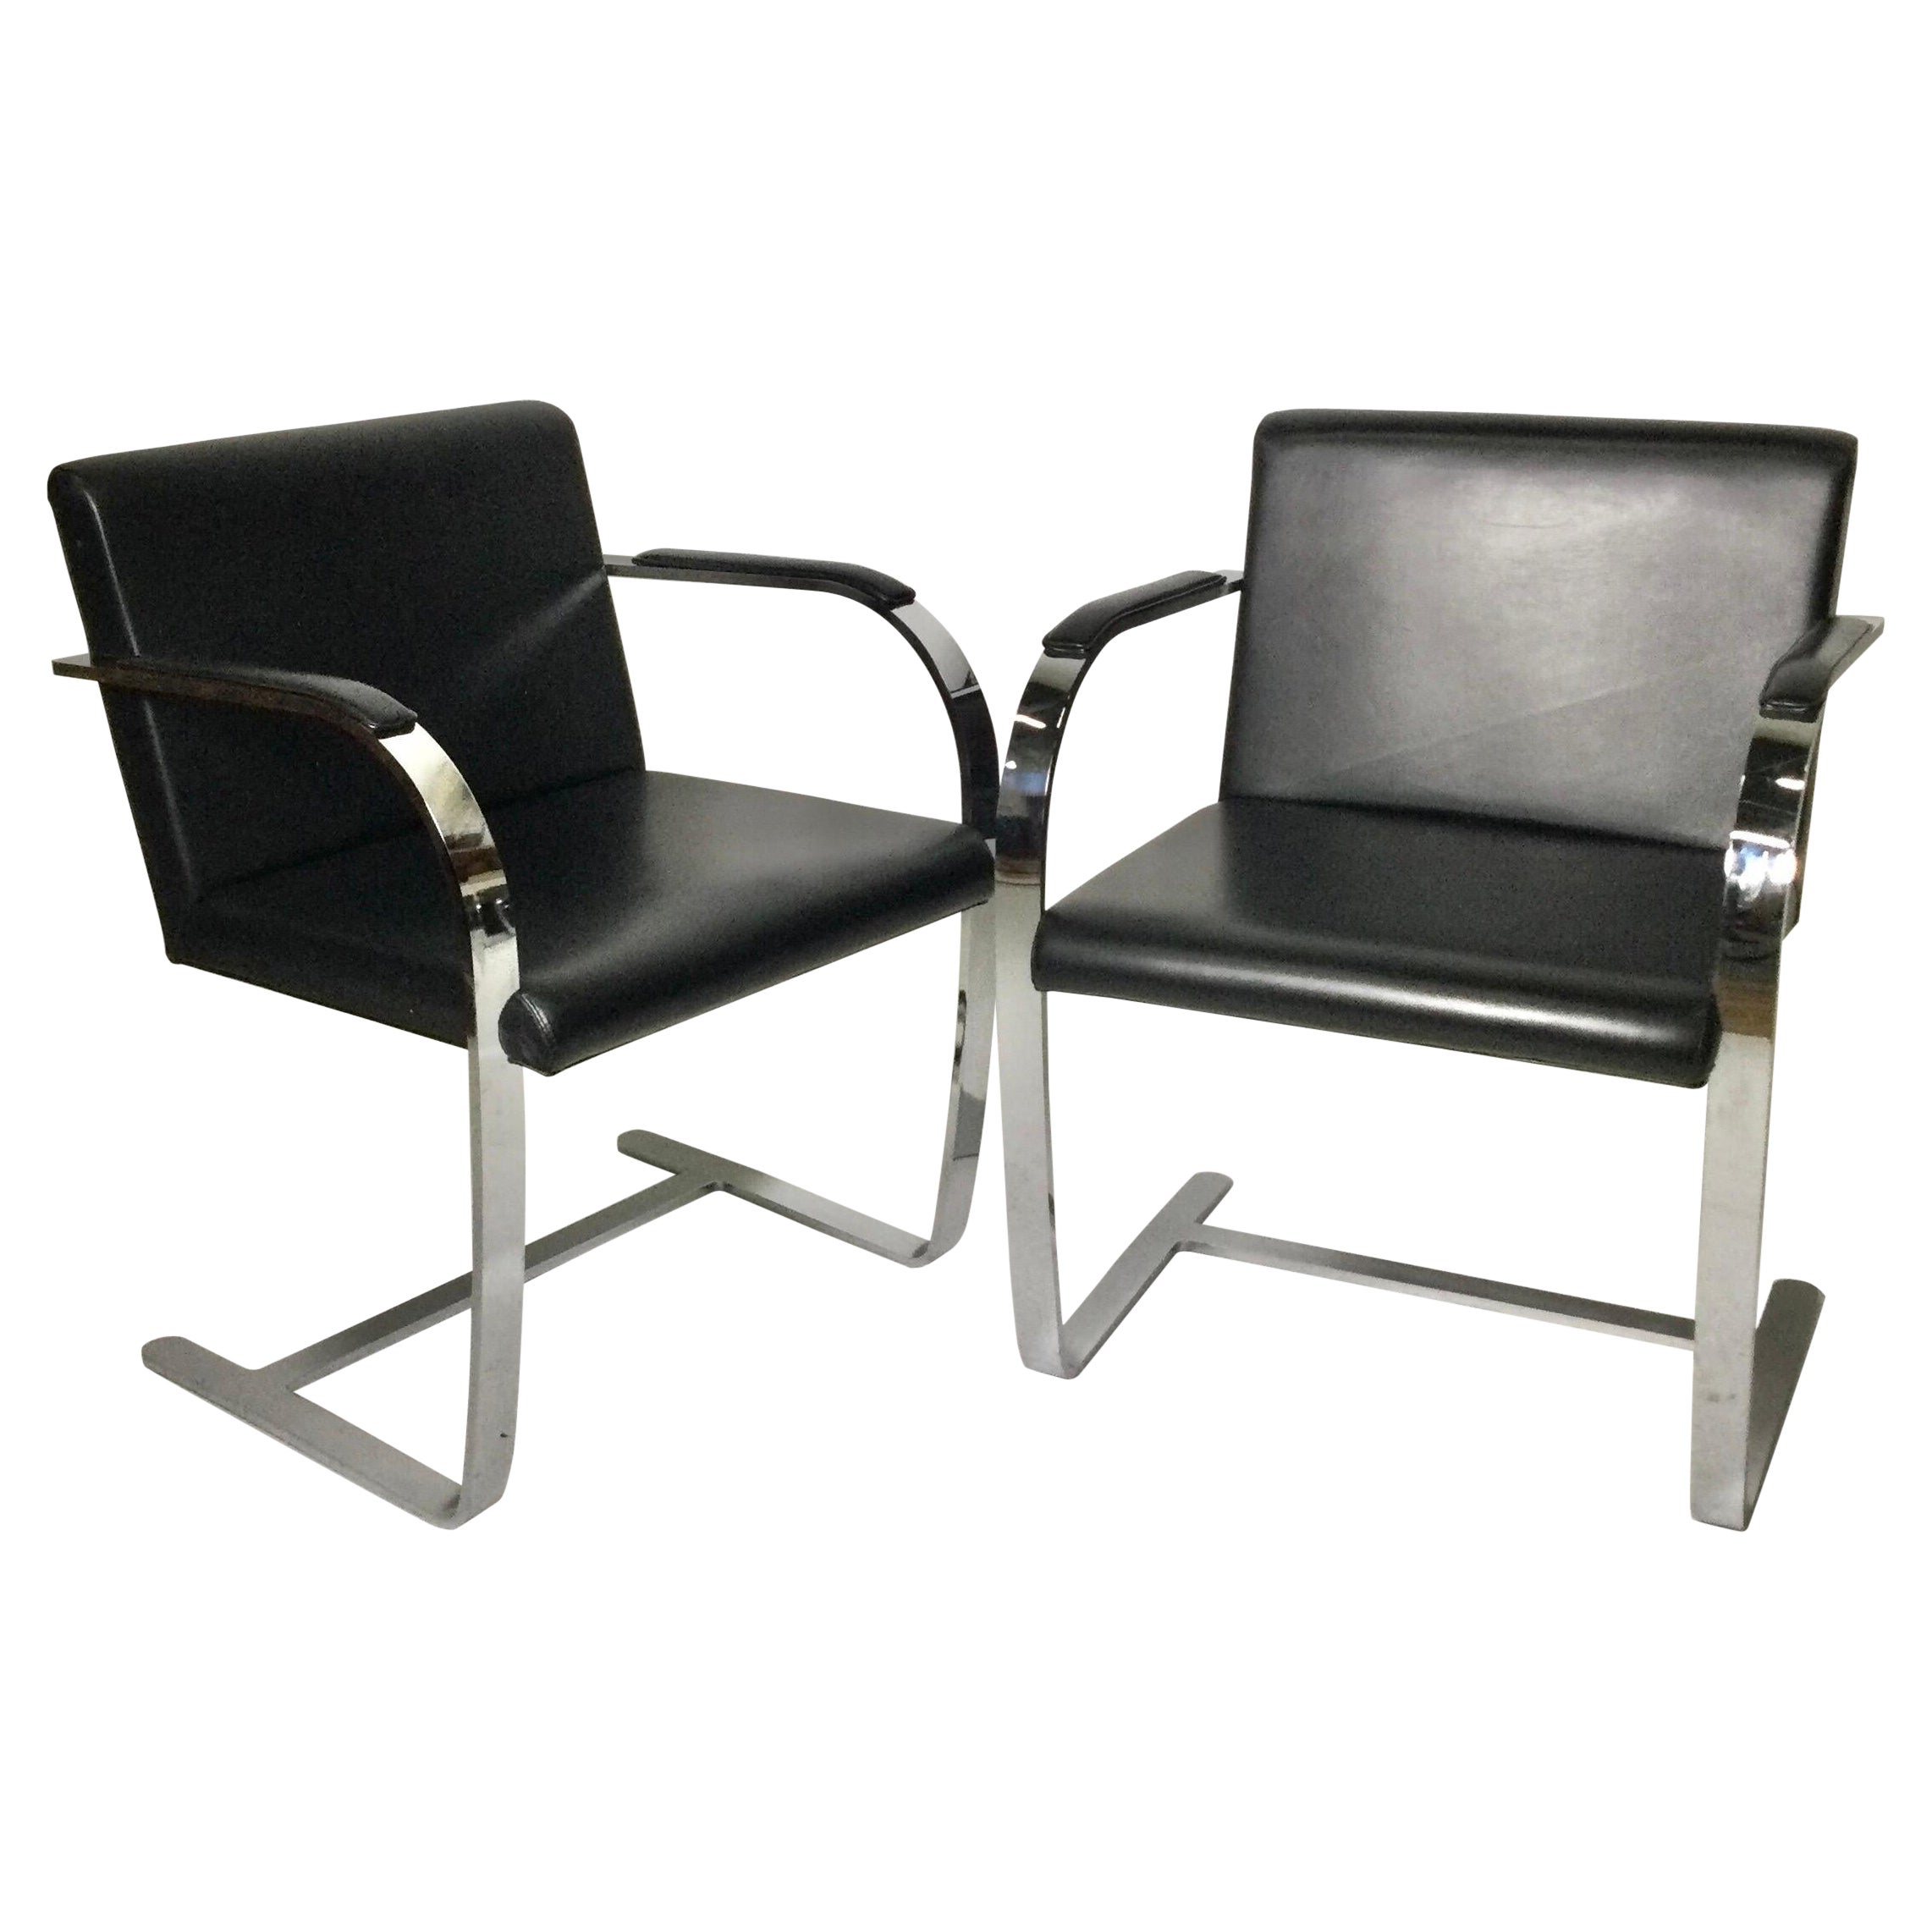 Pair of Knoll Bruno Style Flat Bar Chairs with Black Leather Upholstery For Sale